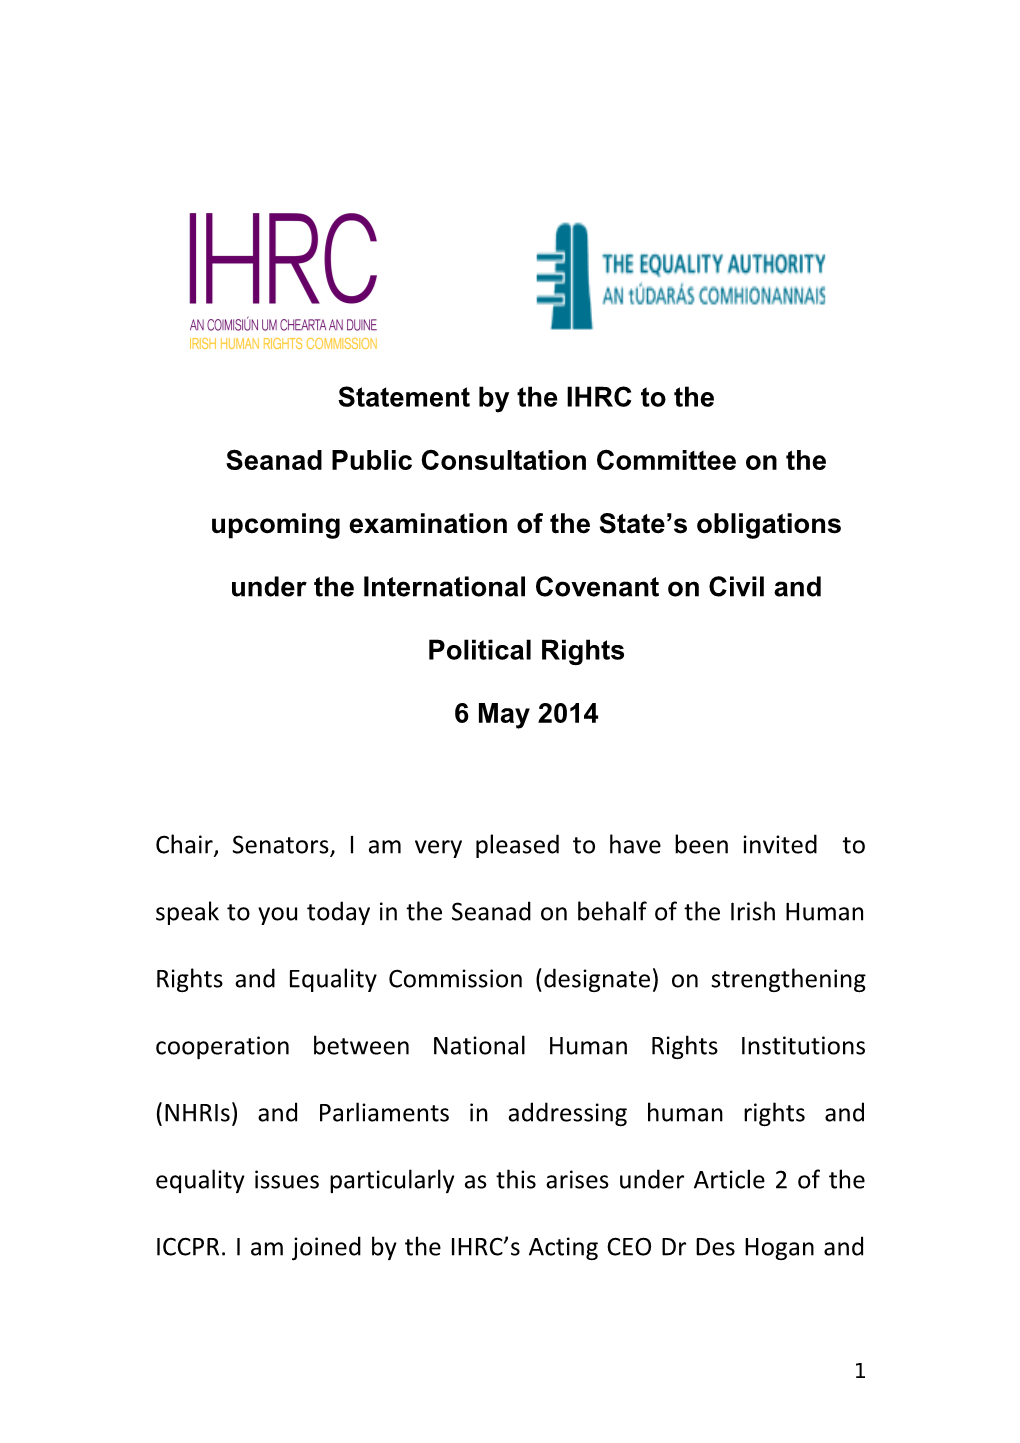 Statement by the IHRC to The